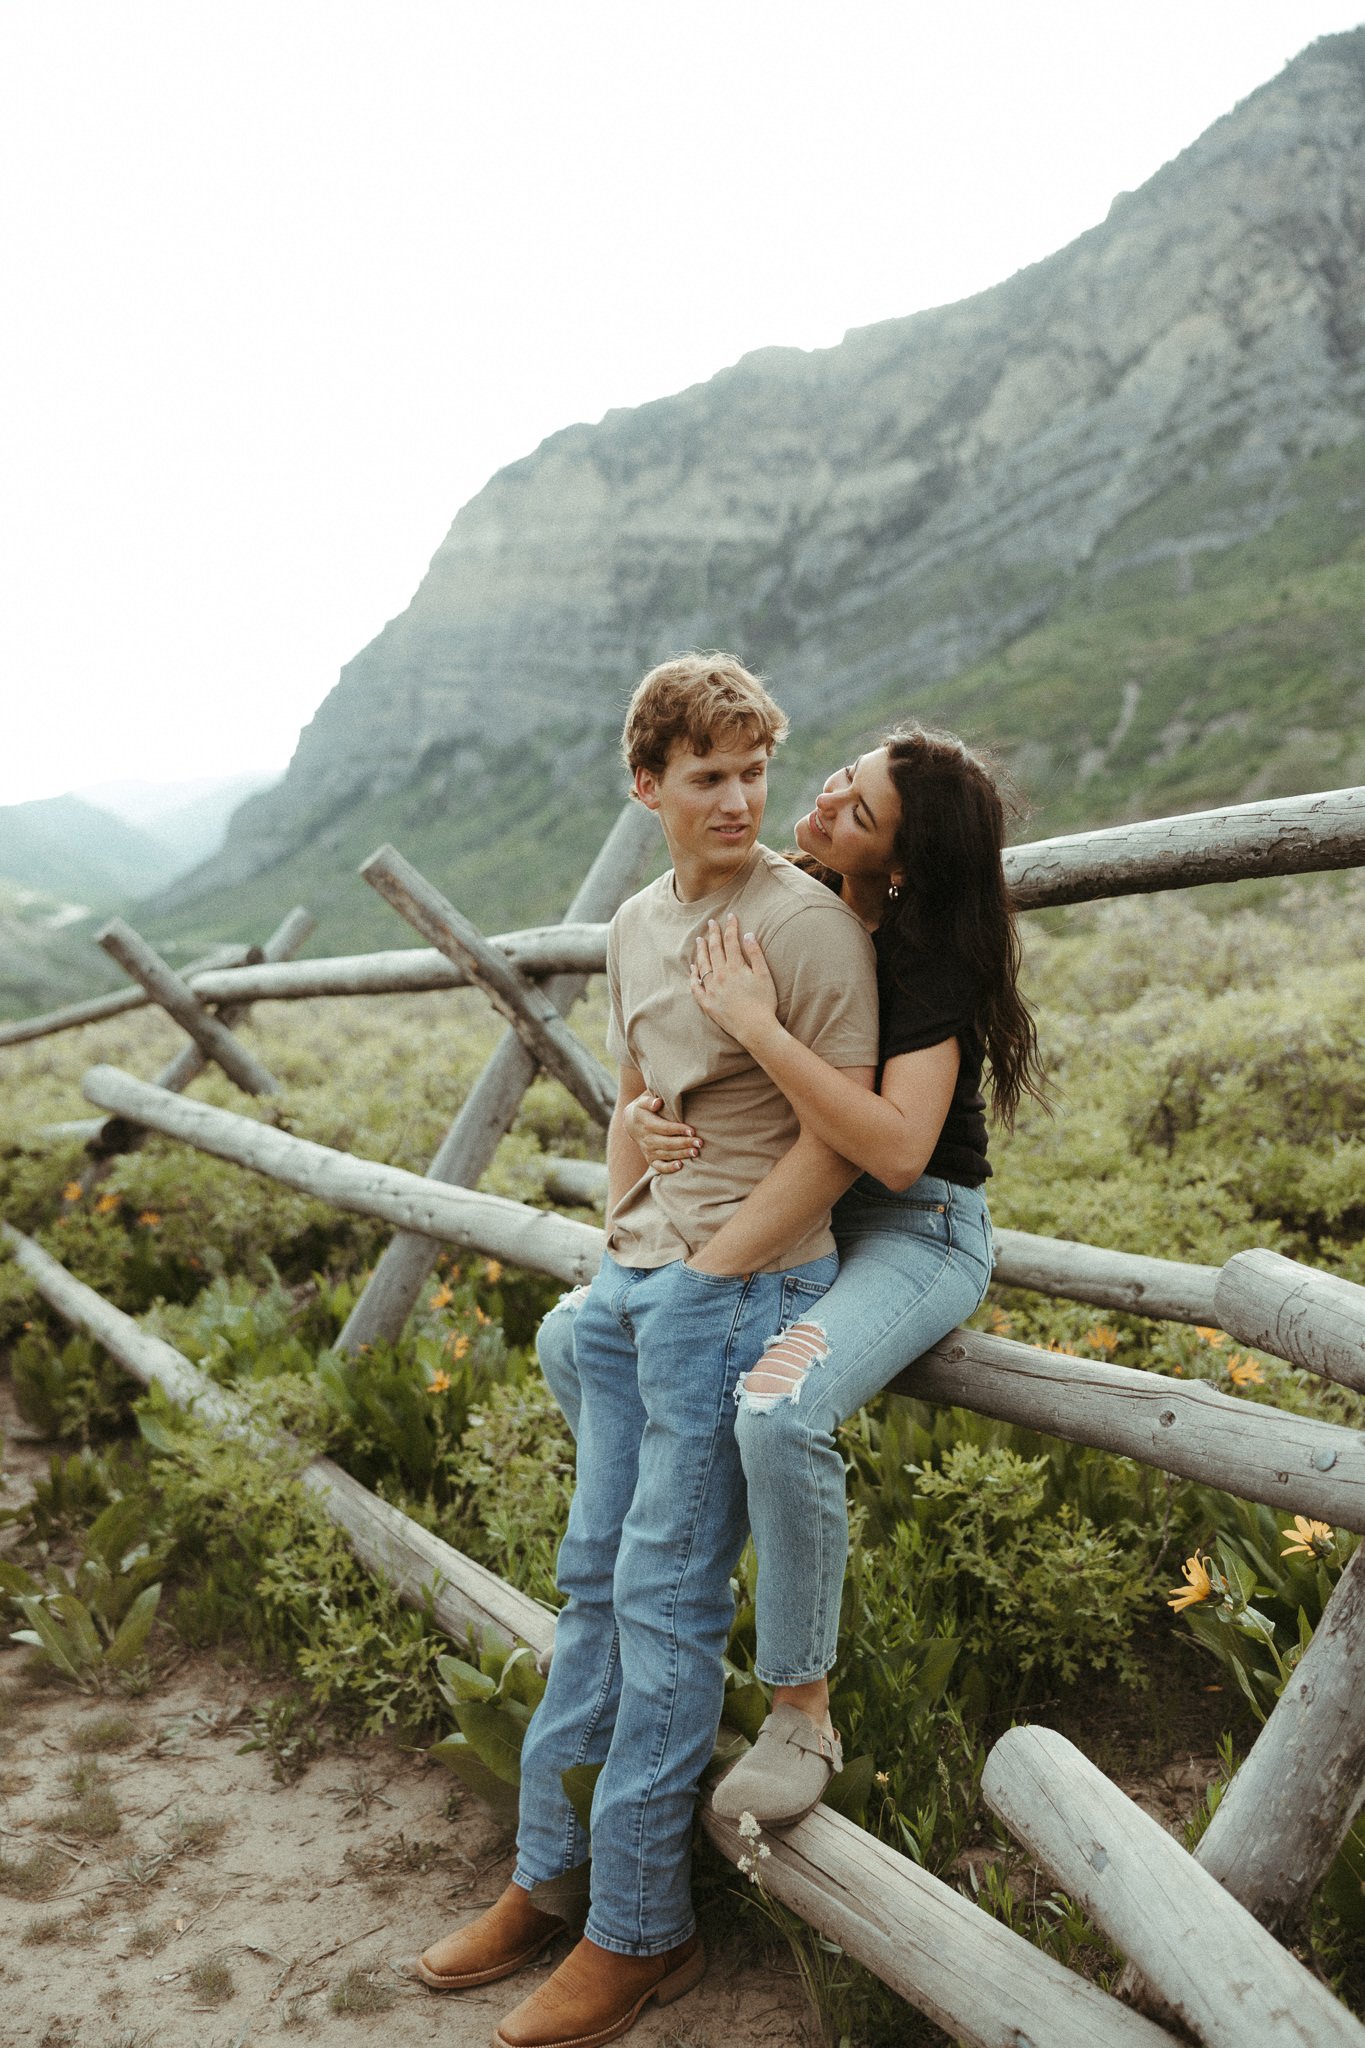 Spring-Provo-Canyon-Wildflowers-Engagement-Session-63